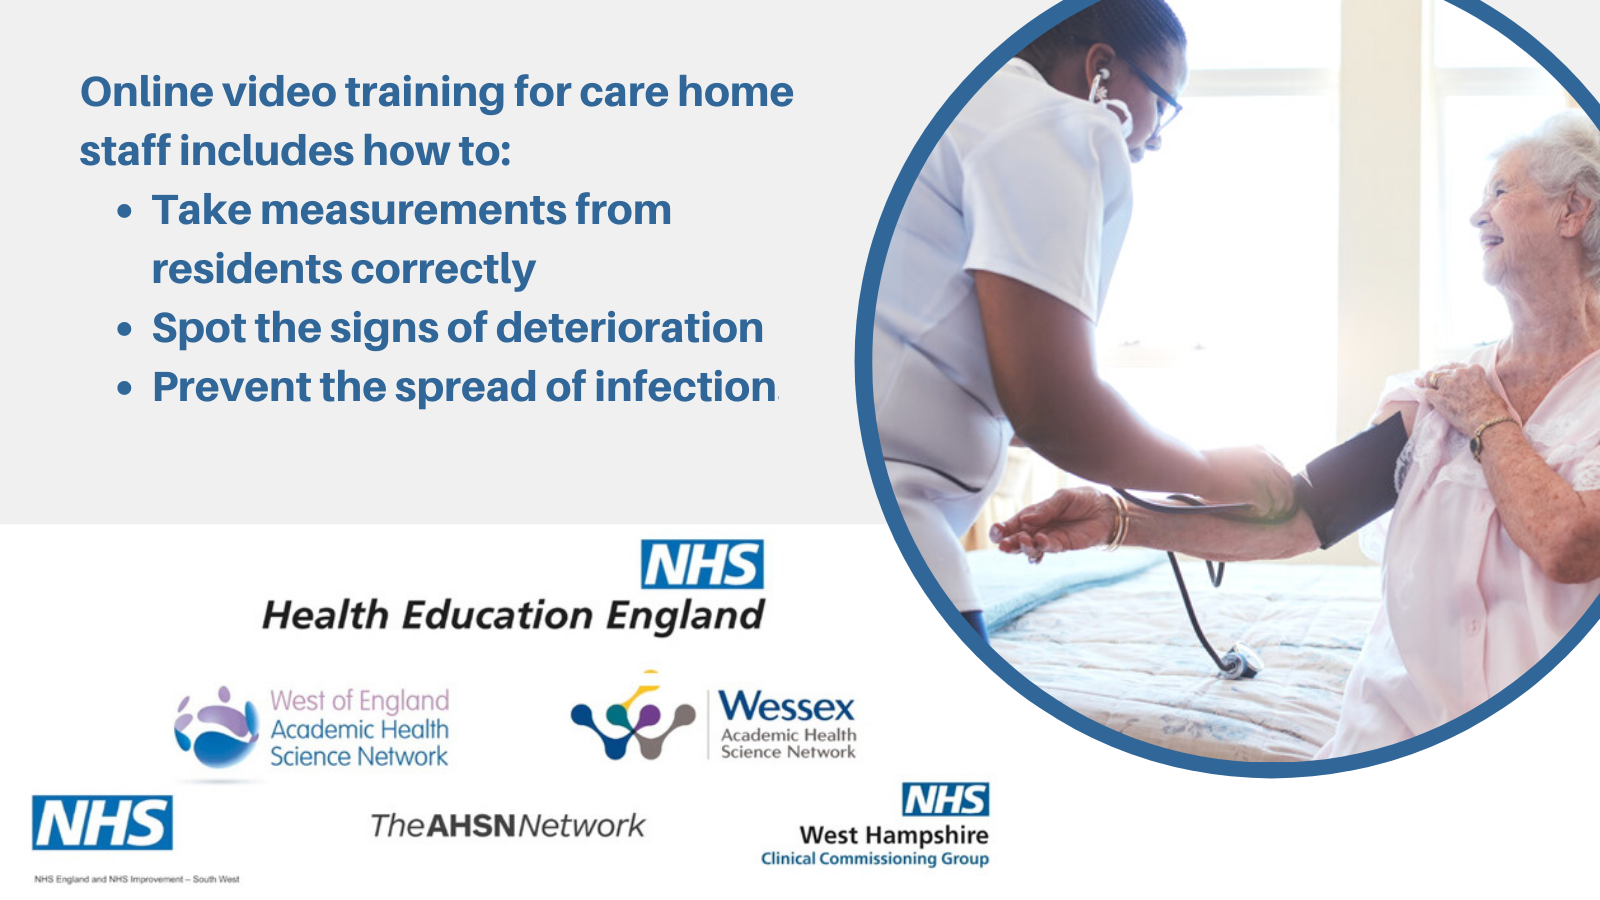 Online video training for care home staff includes how to: Take measurements from residents correctly, spot the signs of deterioration and prevent the spread of infection. Health Education England logo. NHS logo. The AHSN Network logo. Wessex AHSN logo. West of England AHSN logo. NHS West Hampshire CCG logo.